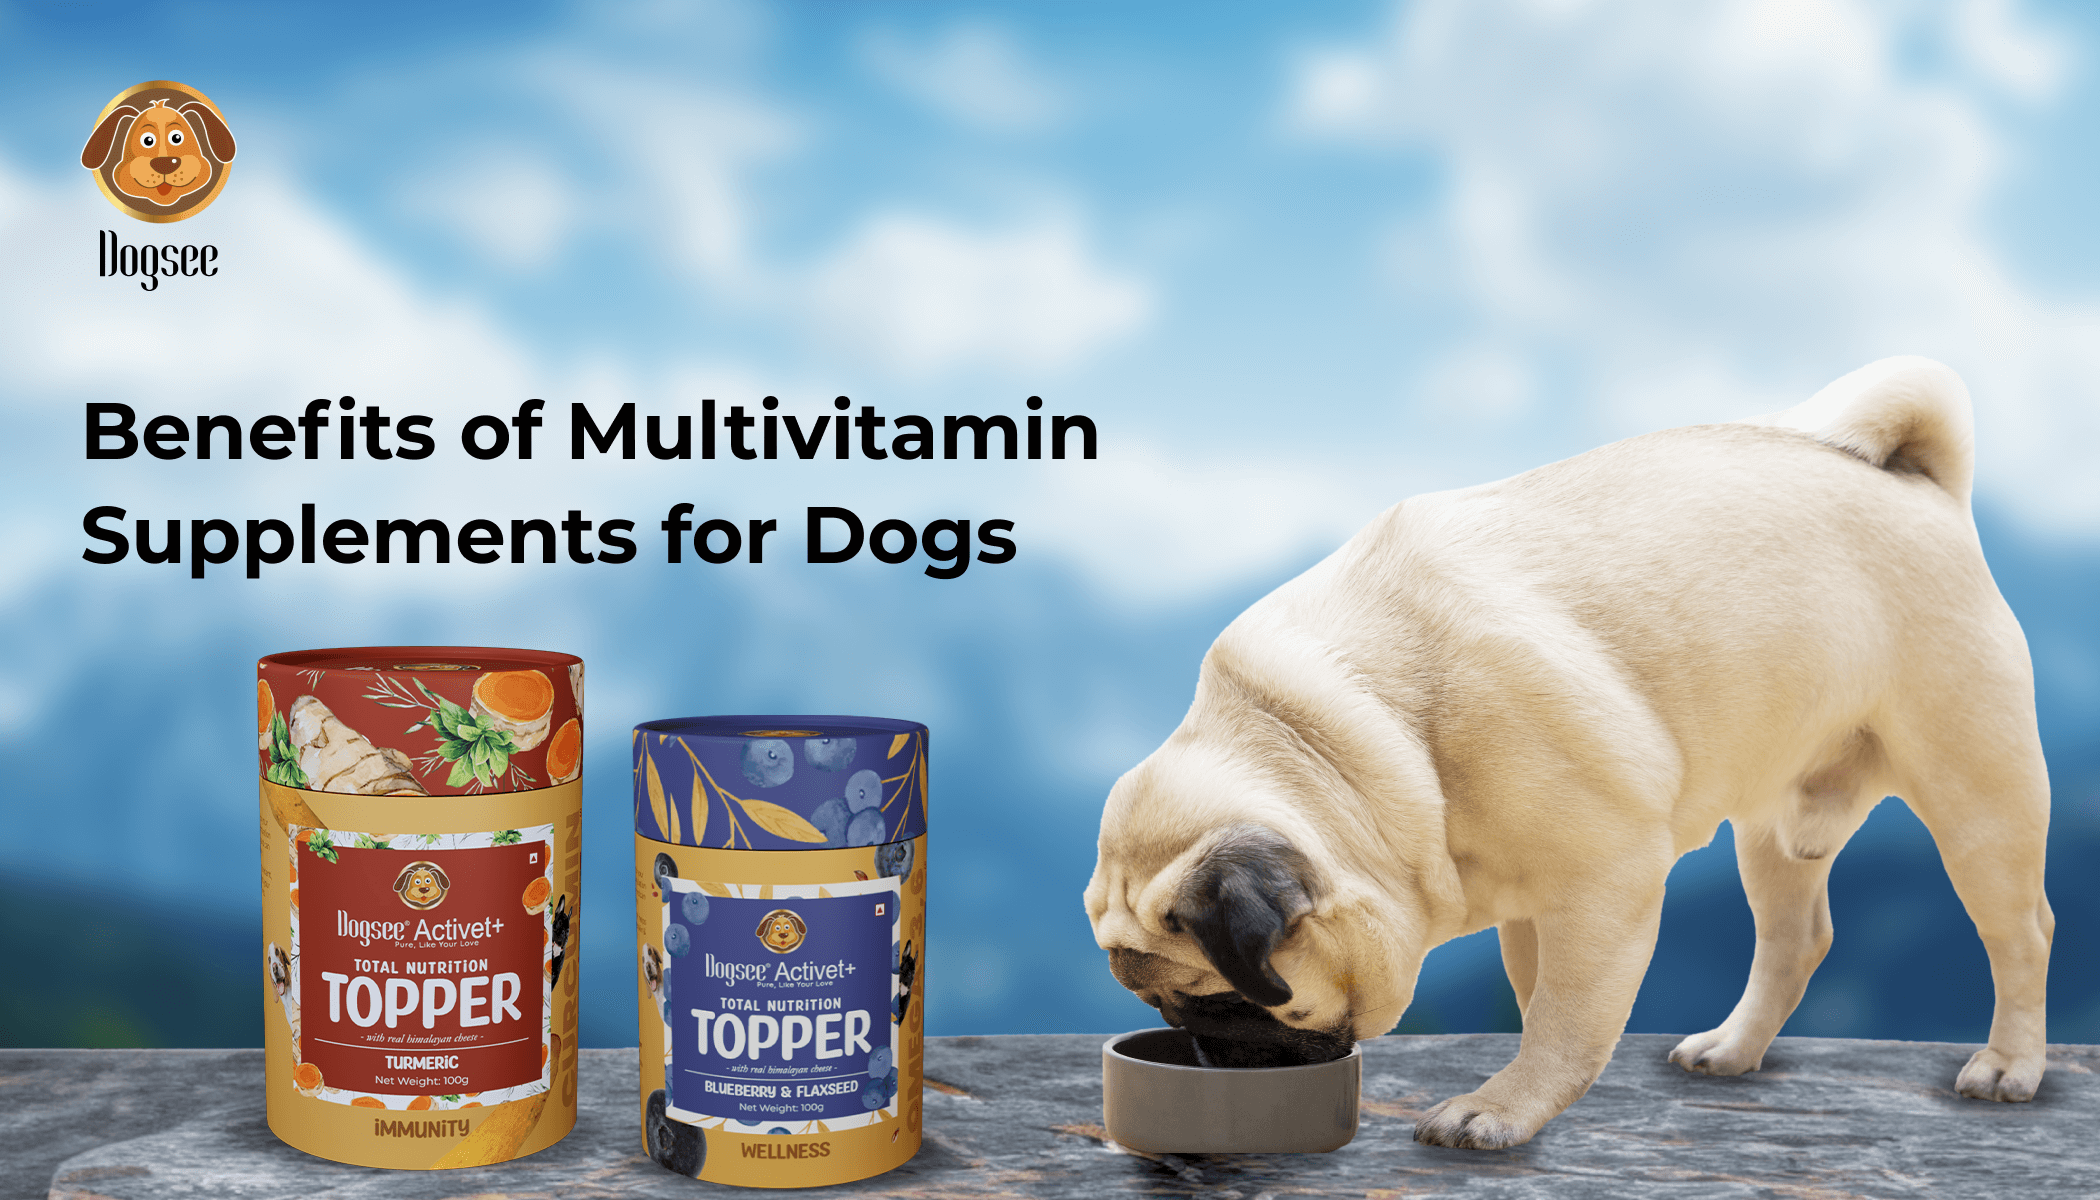 Benefits of Multivitamin Supplements for Dogs